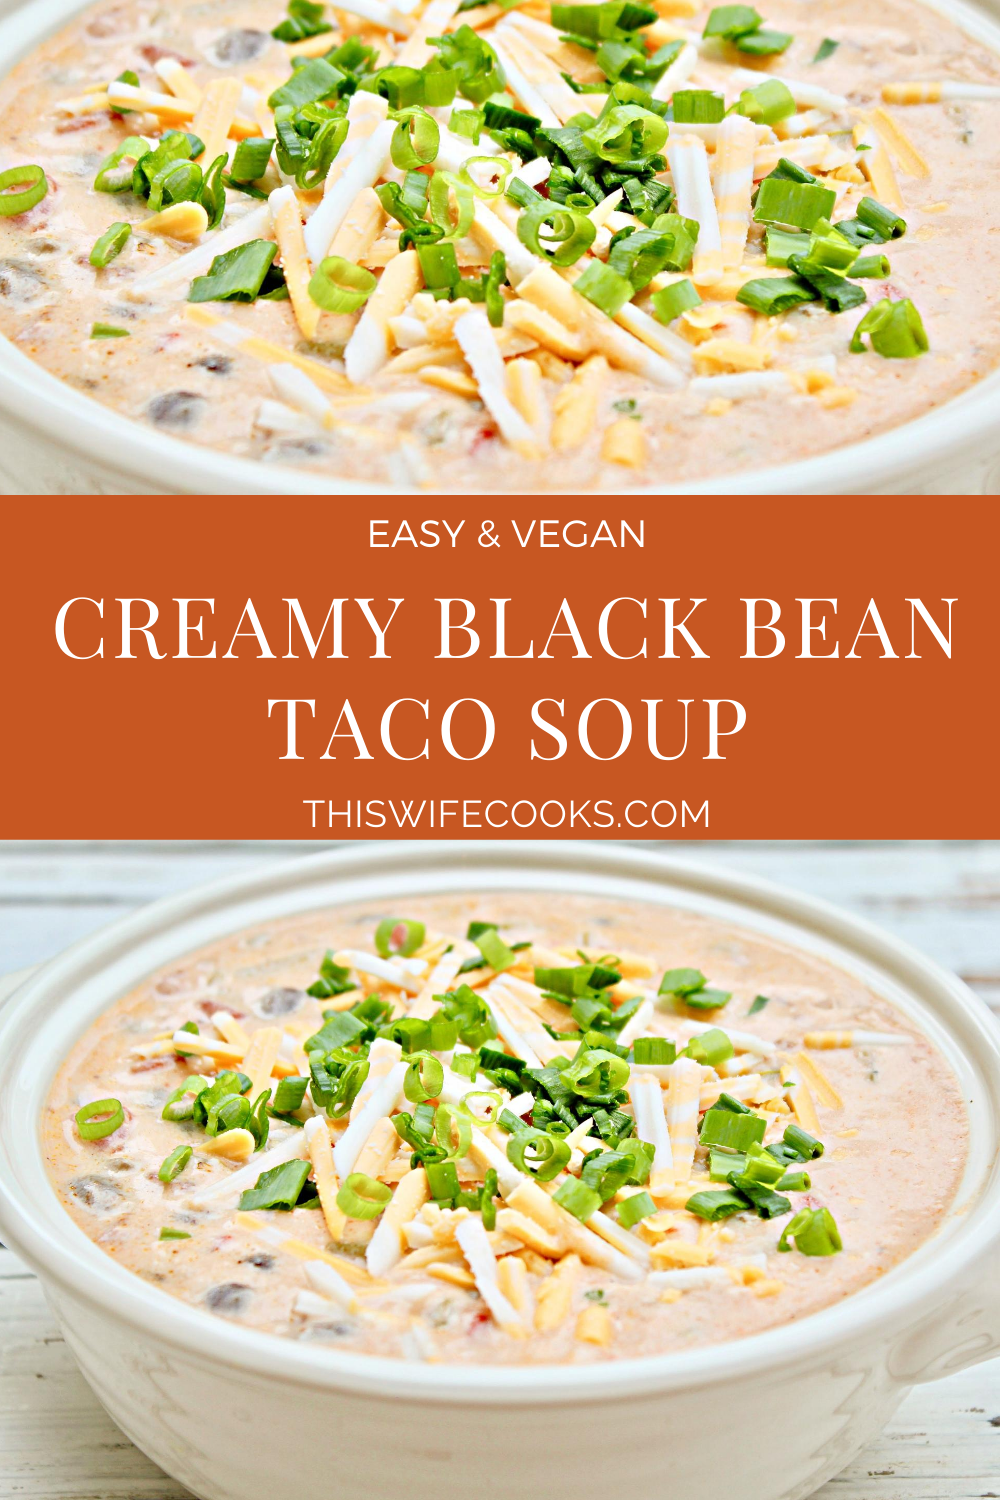 Creamy Black Bean Taco Soup ~ Easy and dairy-free cheesy weeknight dinner packed with black beans, onions, tomatoes, green chiles, and taco seasonings. If you like loaded queso, you're going to love this taco soup! via @thiswifecooks